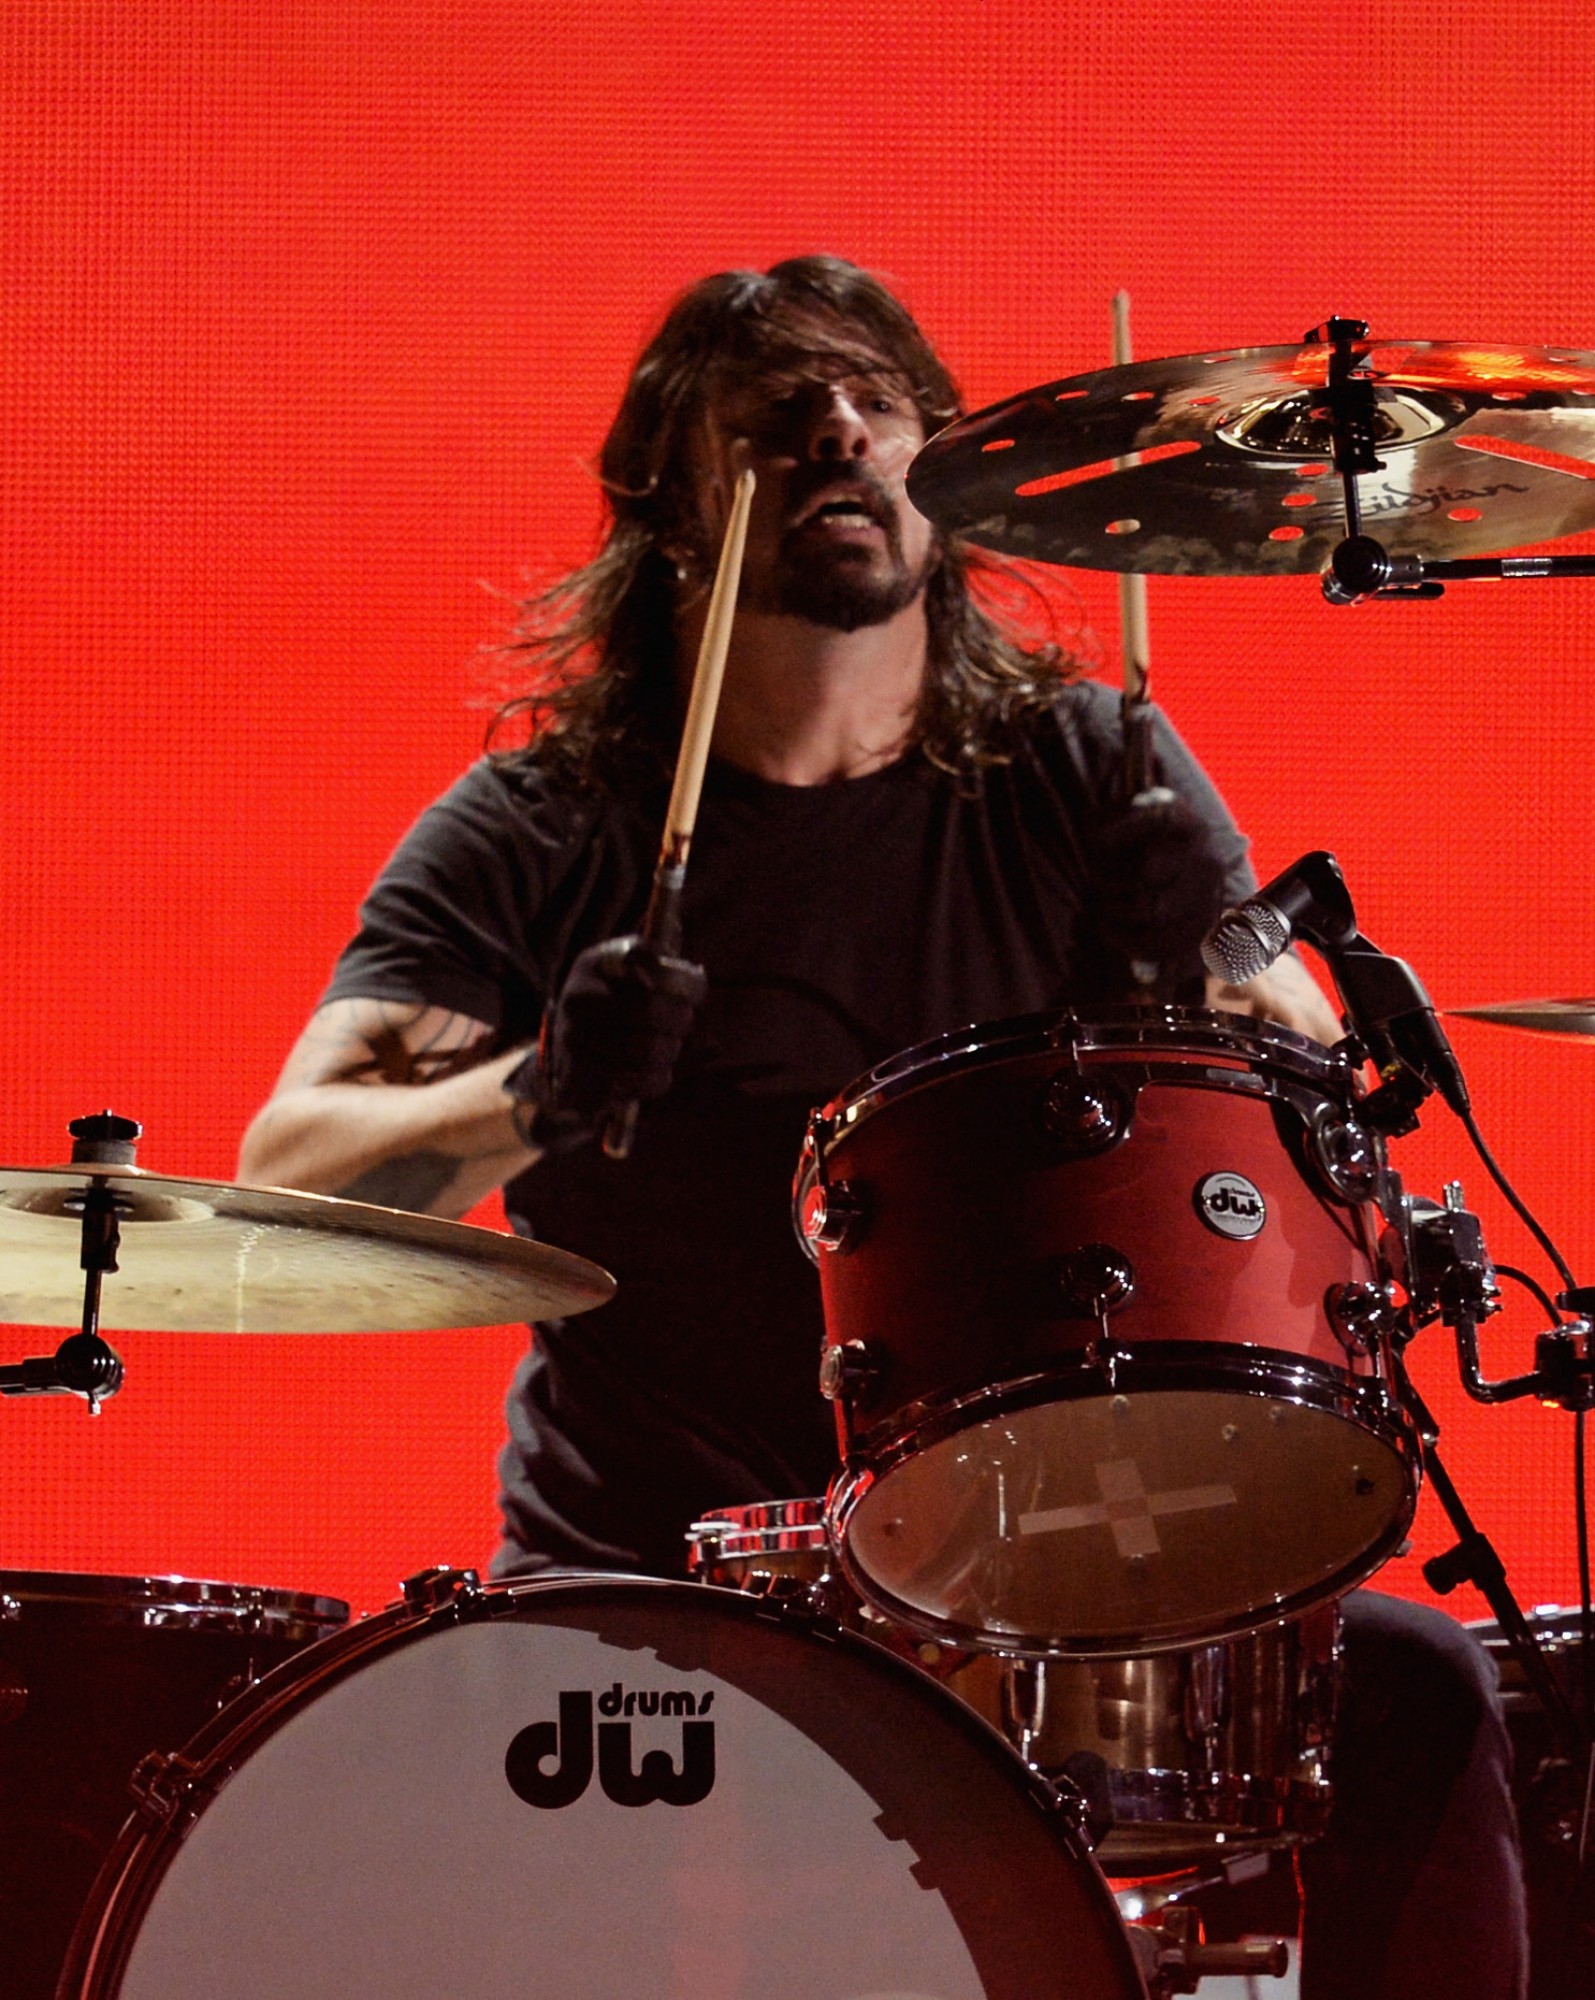 Grammys Grohl Dave Drum Wallpaper